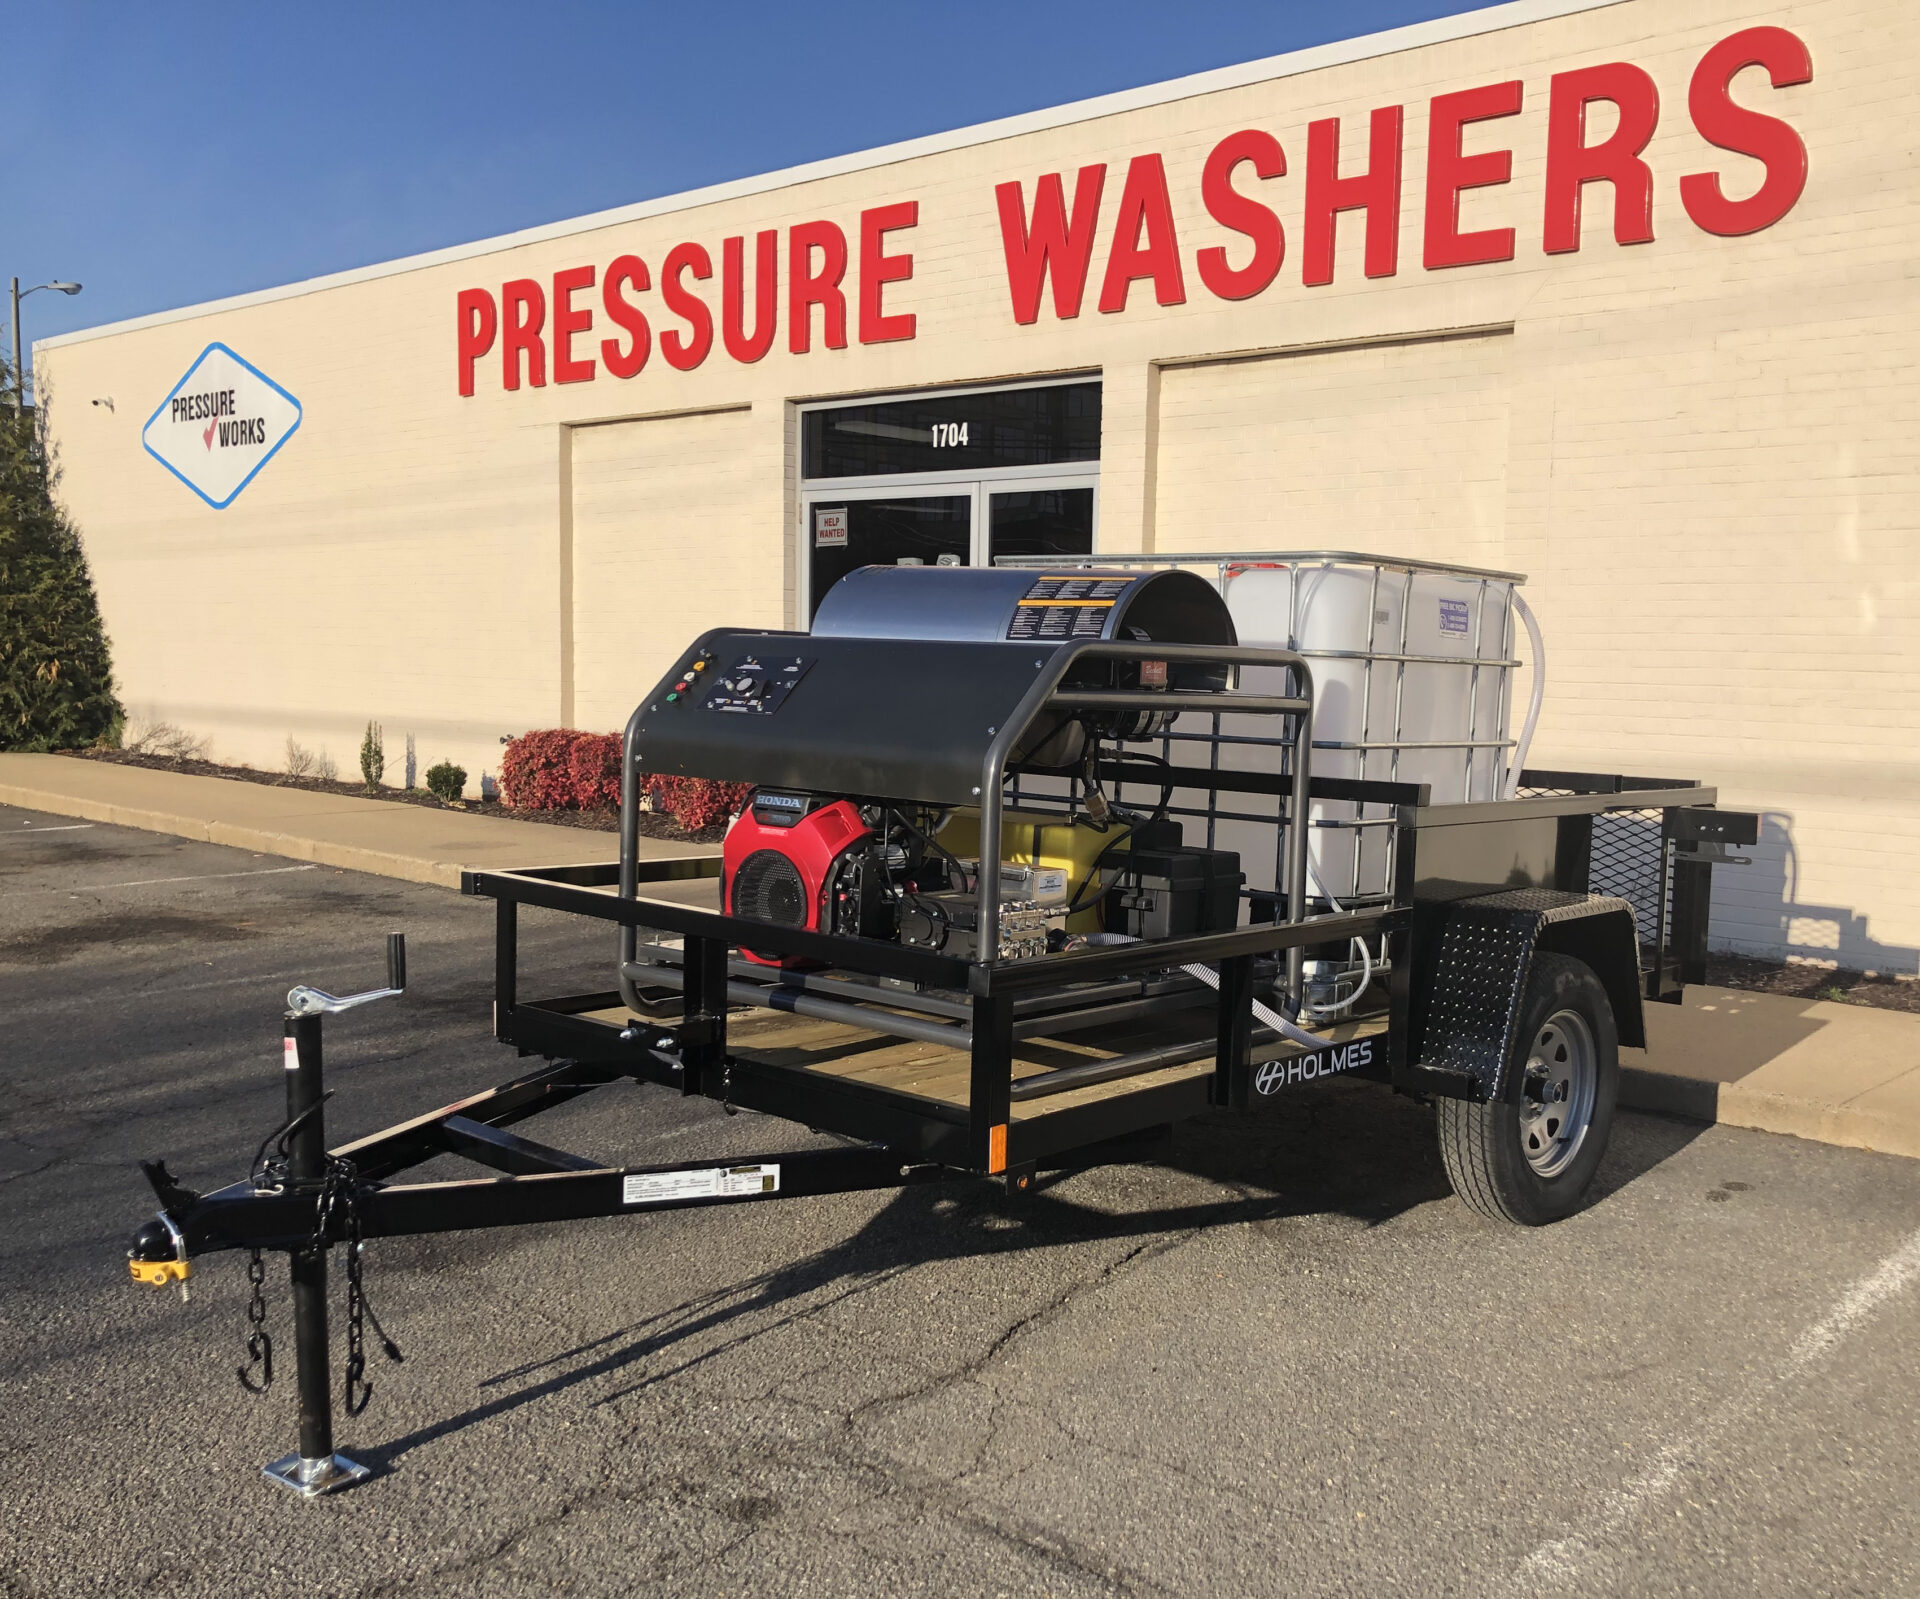 Power Washing Trailer Products & Equipment